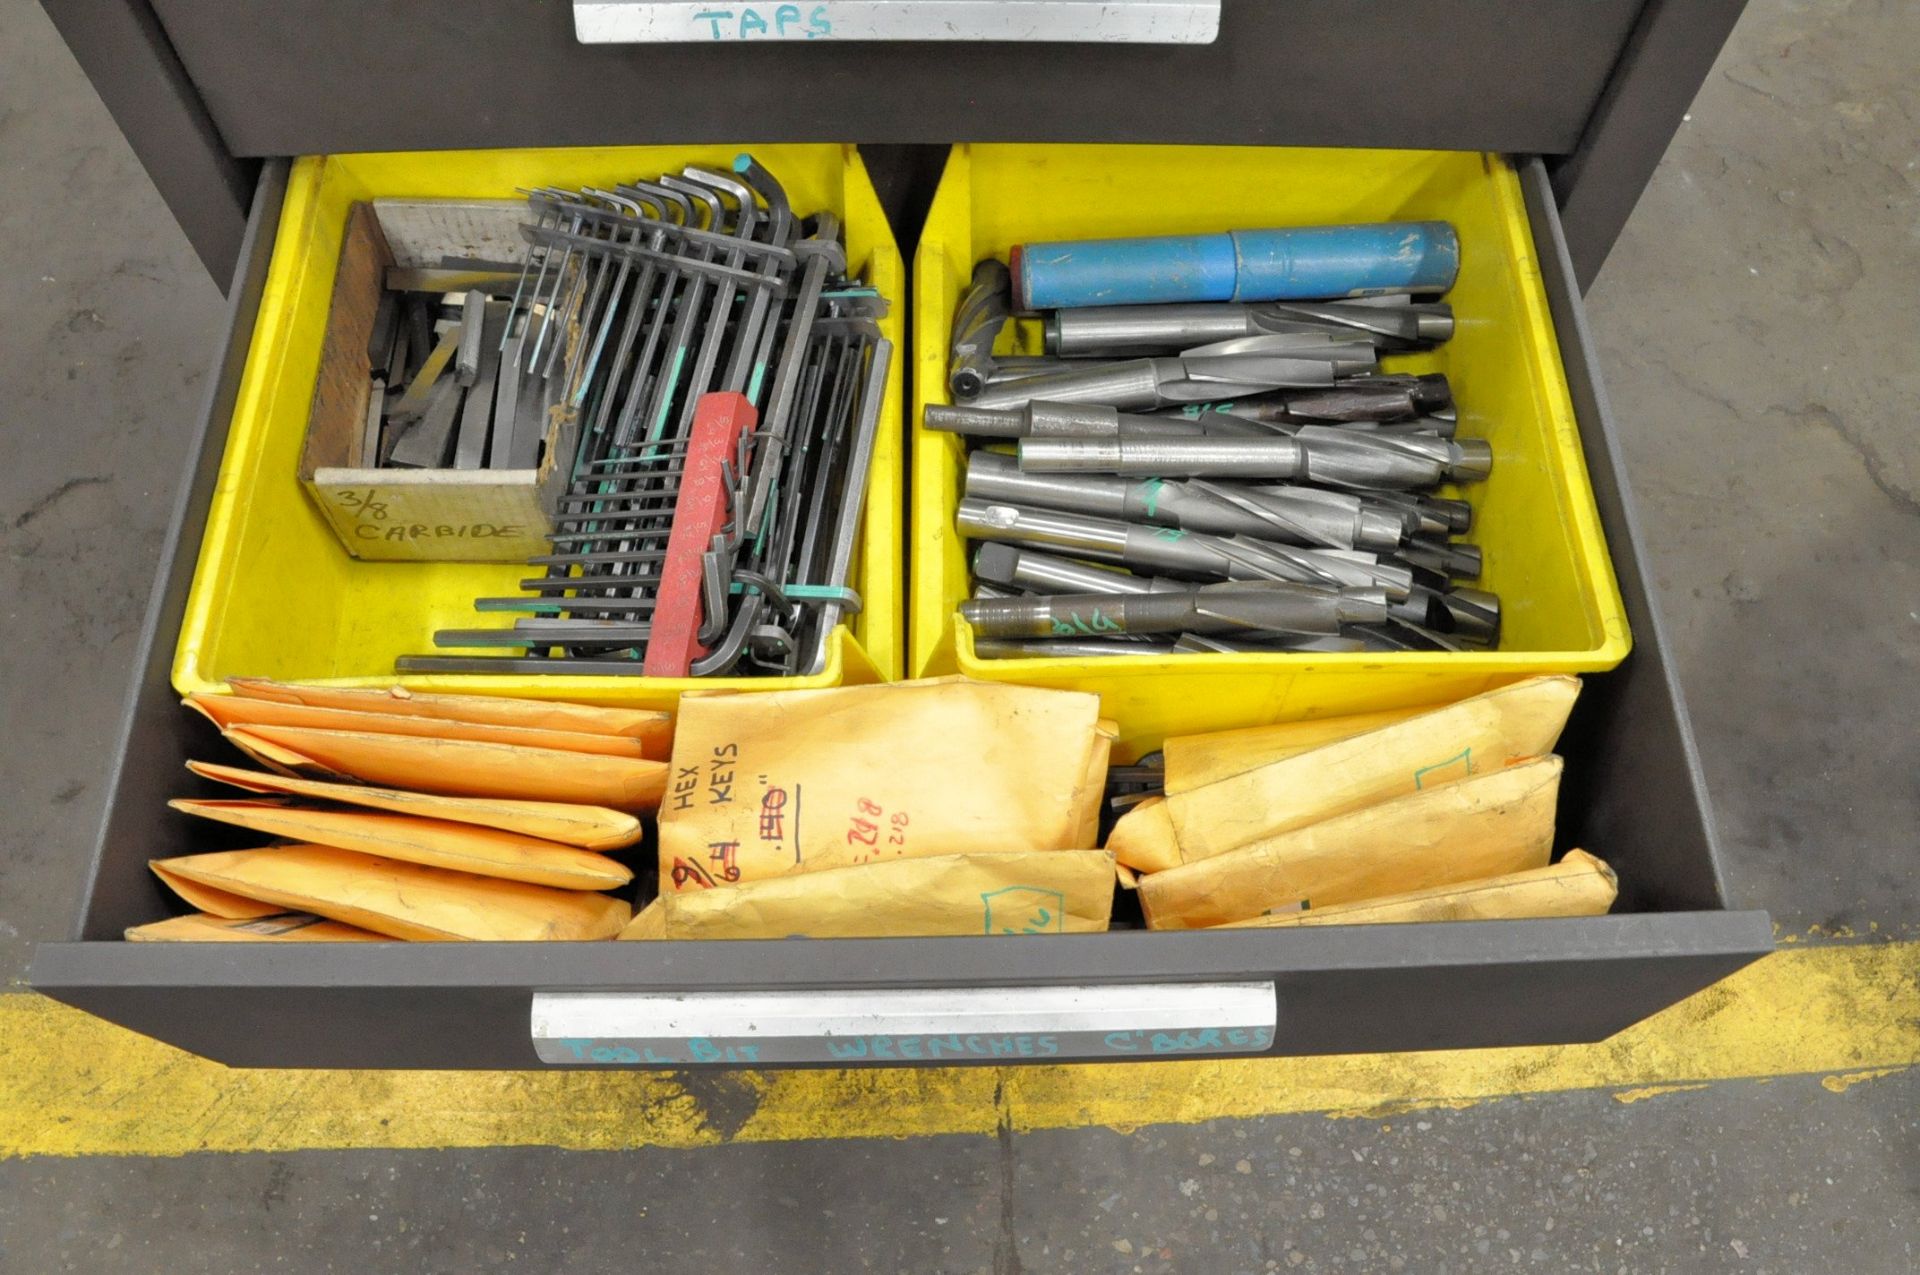 Lot-Kennedy Rolling Tool Chest with Top Tool Box with Tools Contents, (E-7), (Yellow Tag) - Image 4 of 4